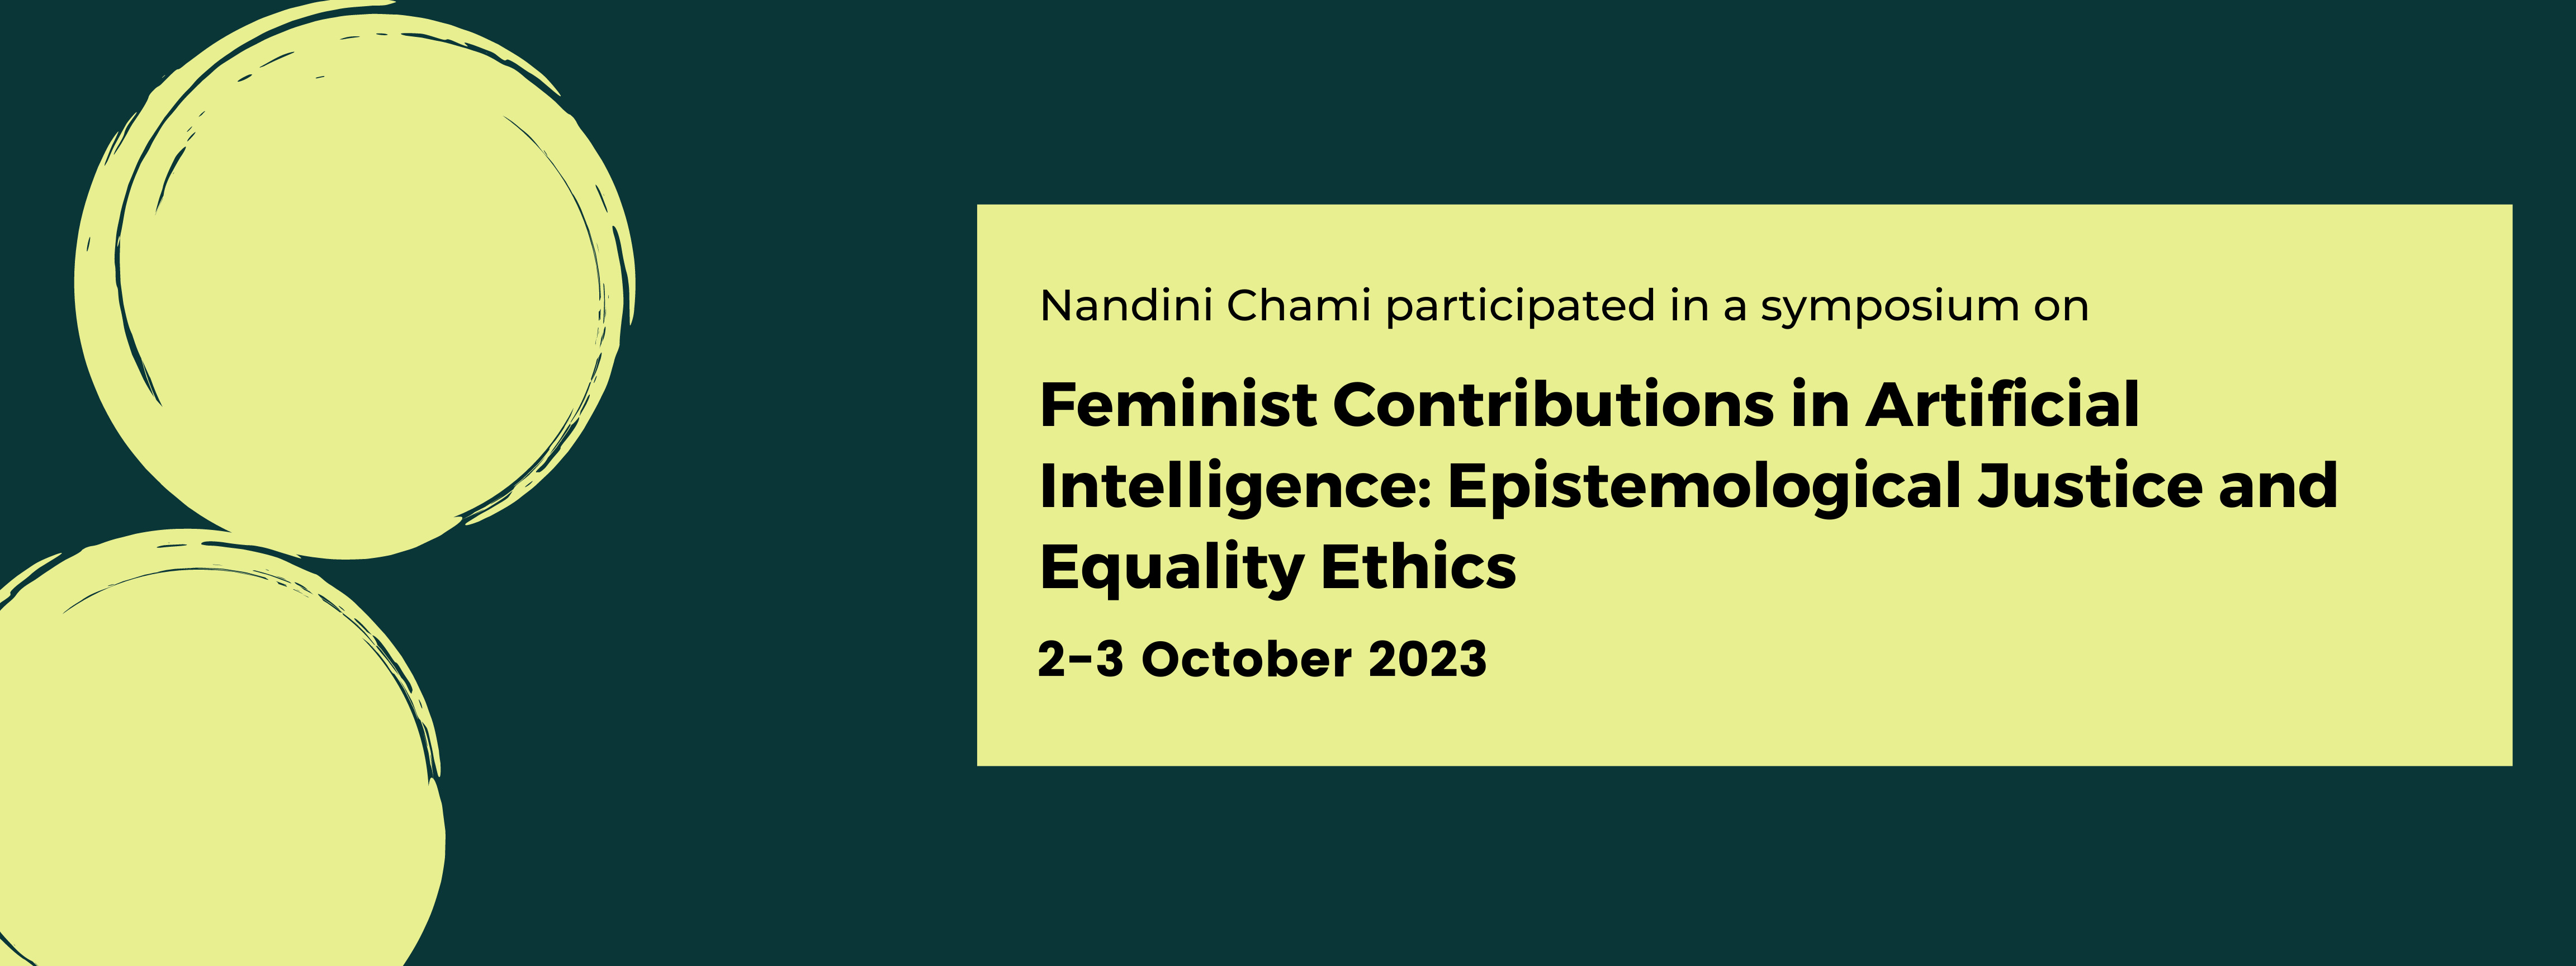 Feminist Contributions in Artificial Intelligence: Epistemological and Ethical Justice of Equality